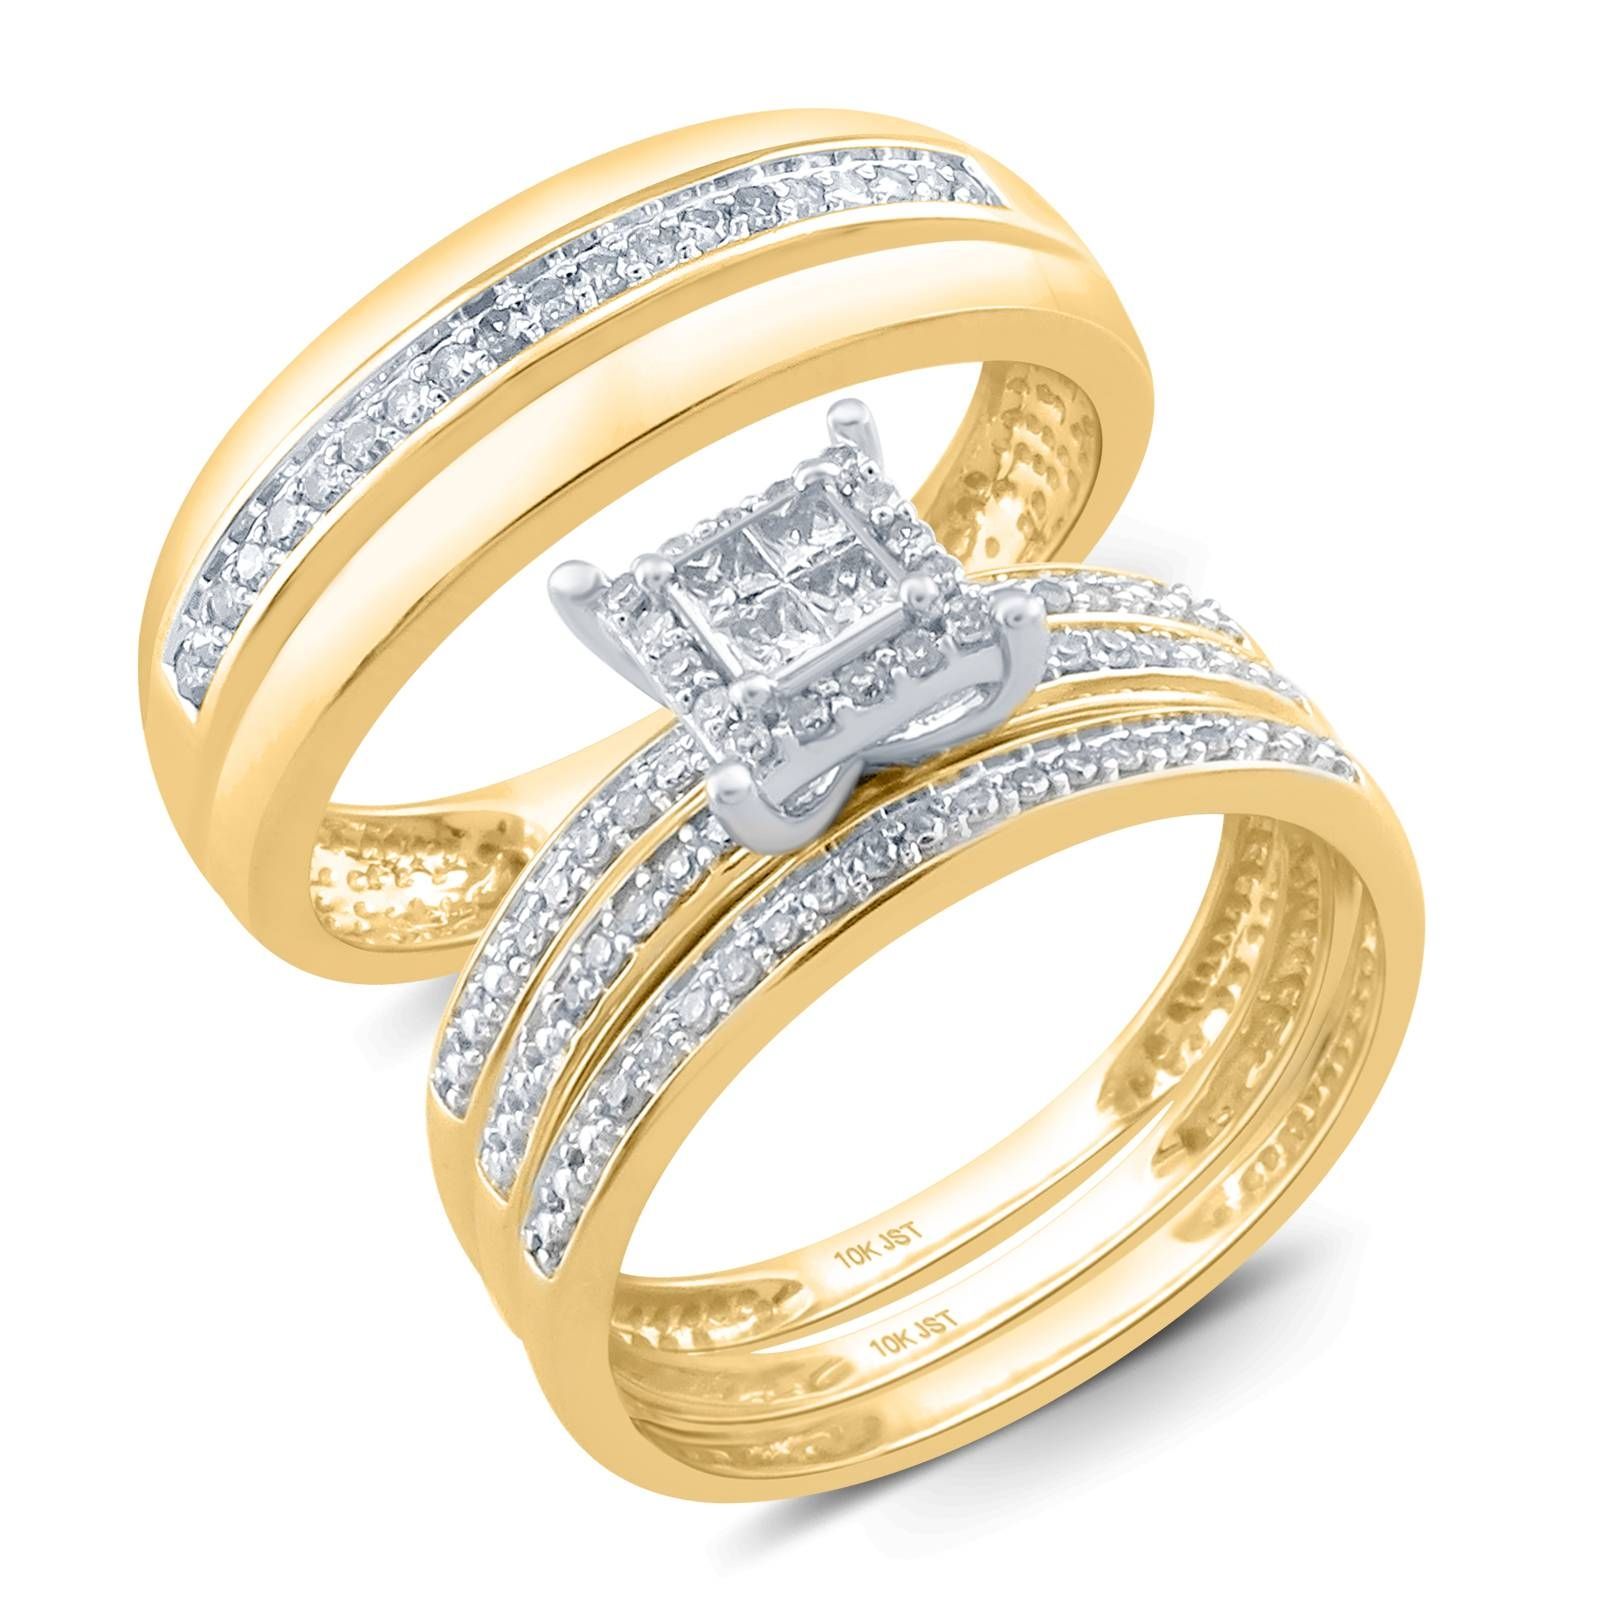 Sears Jewelry Gold Diamond Rings | Wedding, Promise, Diamond Inside Sears Engagement Rings (View 6 of 15)